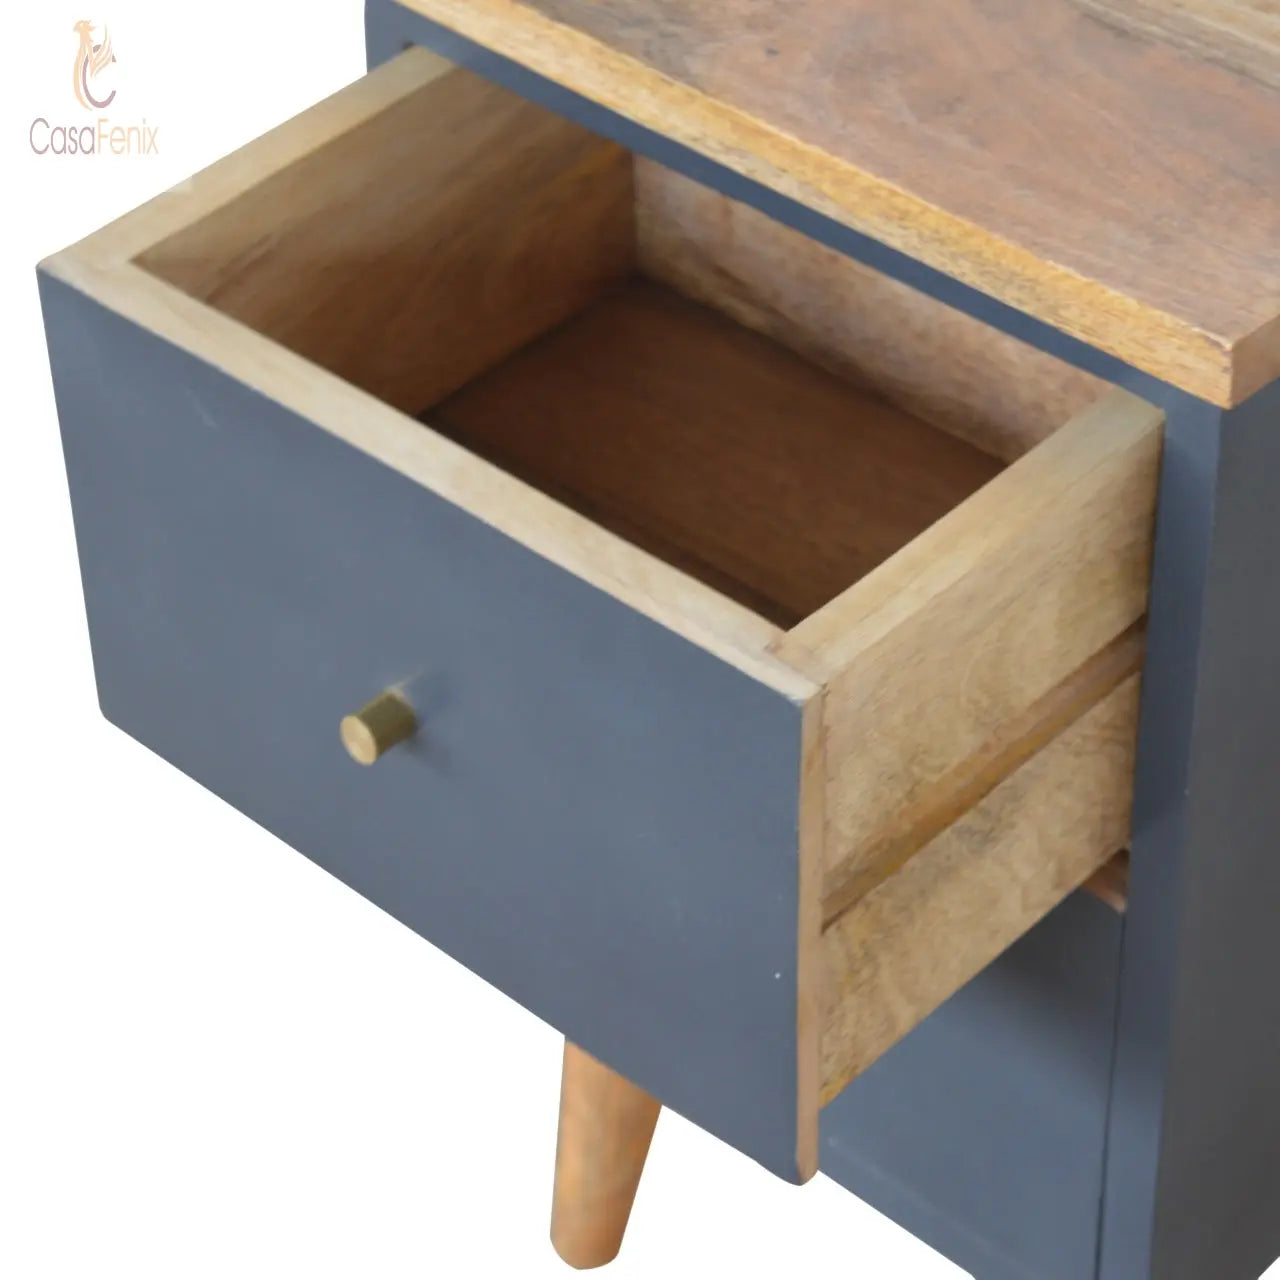 Charcoal Black Hand Painted Bedside Table 2 Drawer Solid Wood Chest - CasaFenix